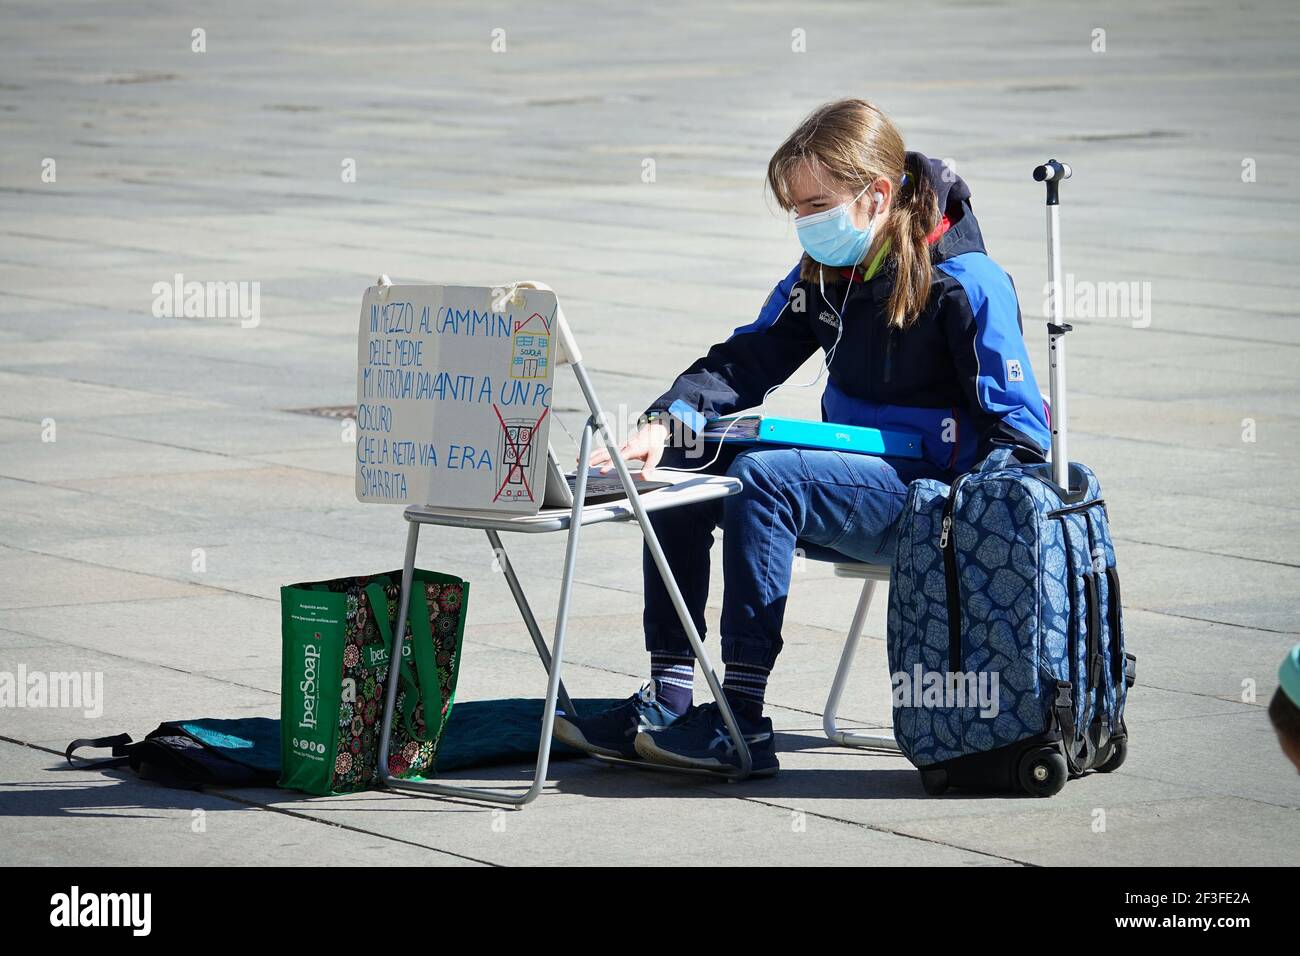 Italian student takes distance learning class on street in protest of Covid school closure  Turin, Italy - March 2021 Stock Photo